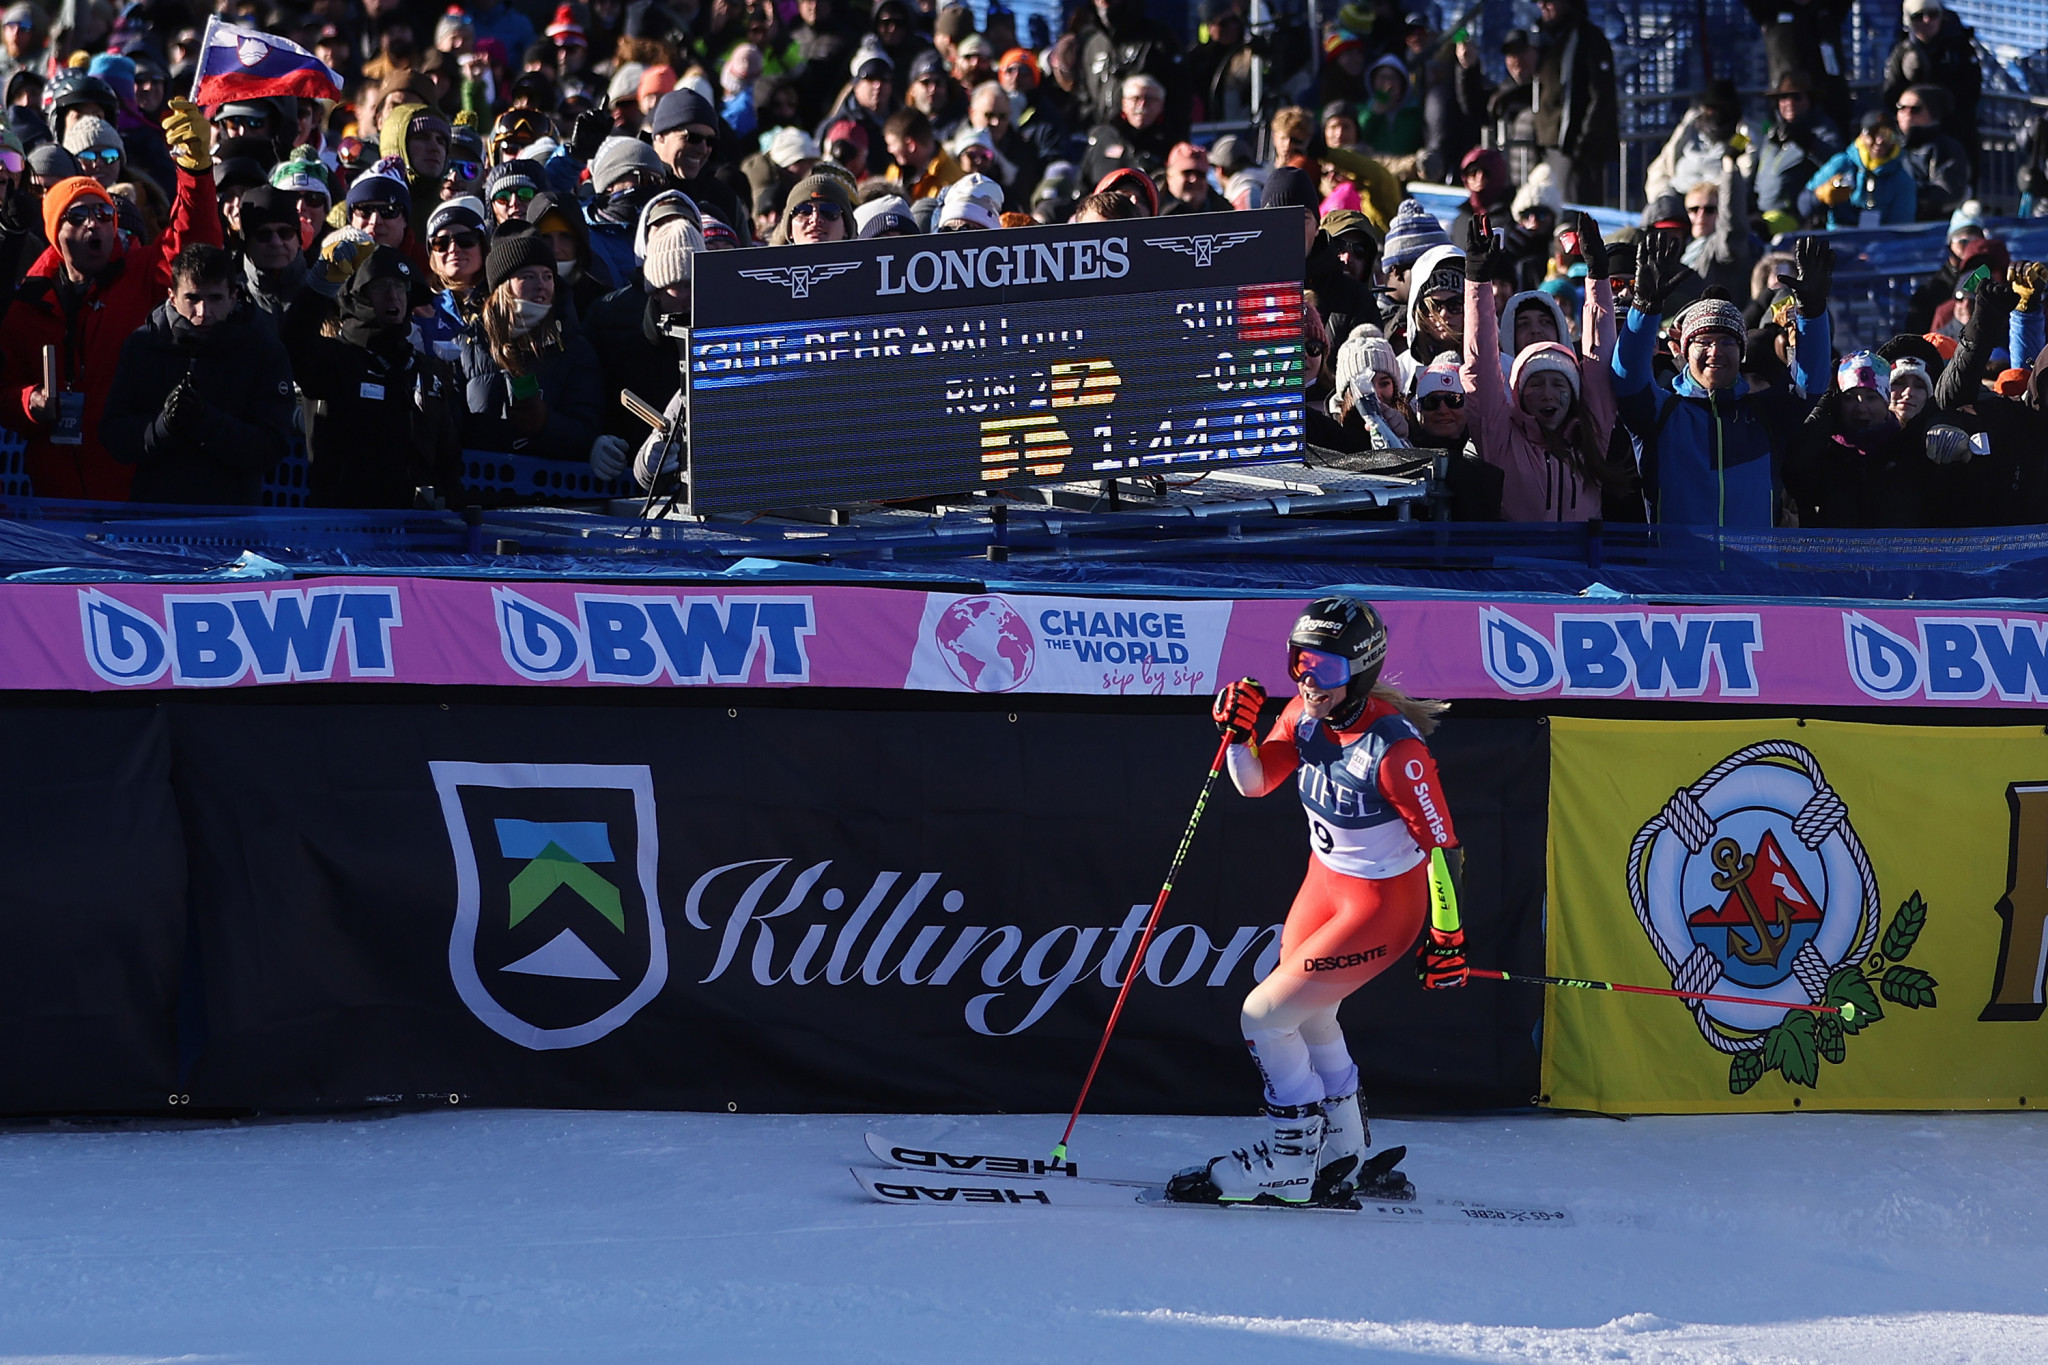 Gut-Behrami wins giant slalom gold in opening World Cup race in Killington